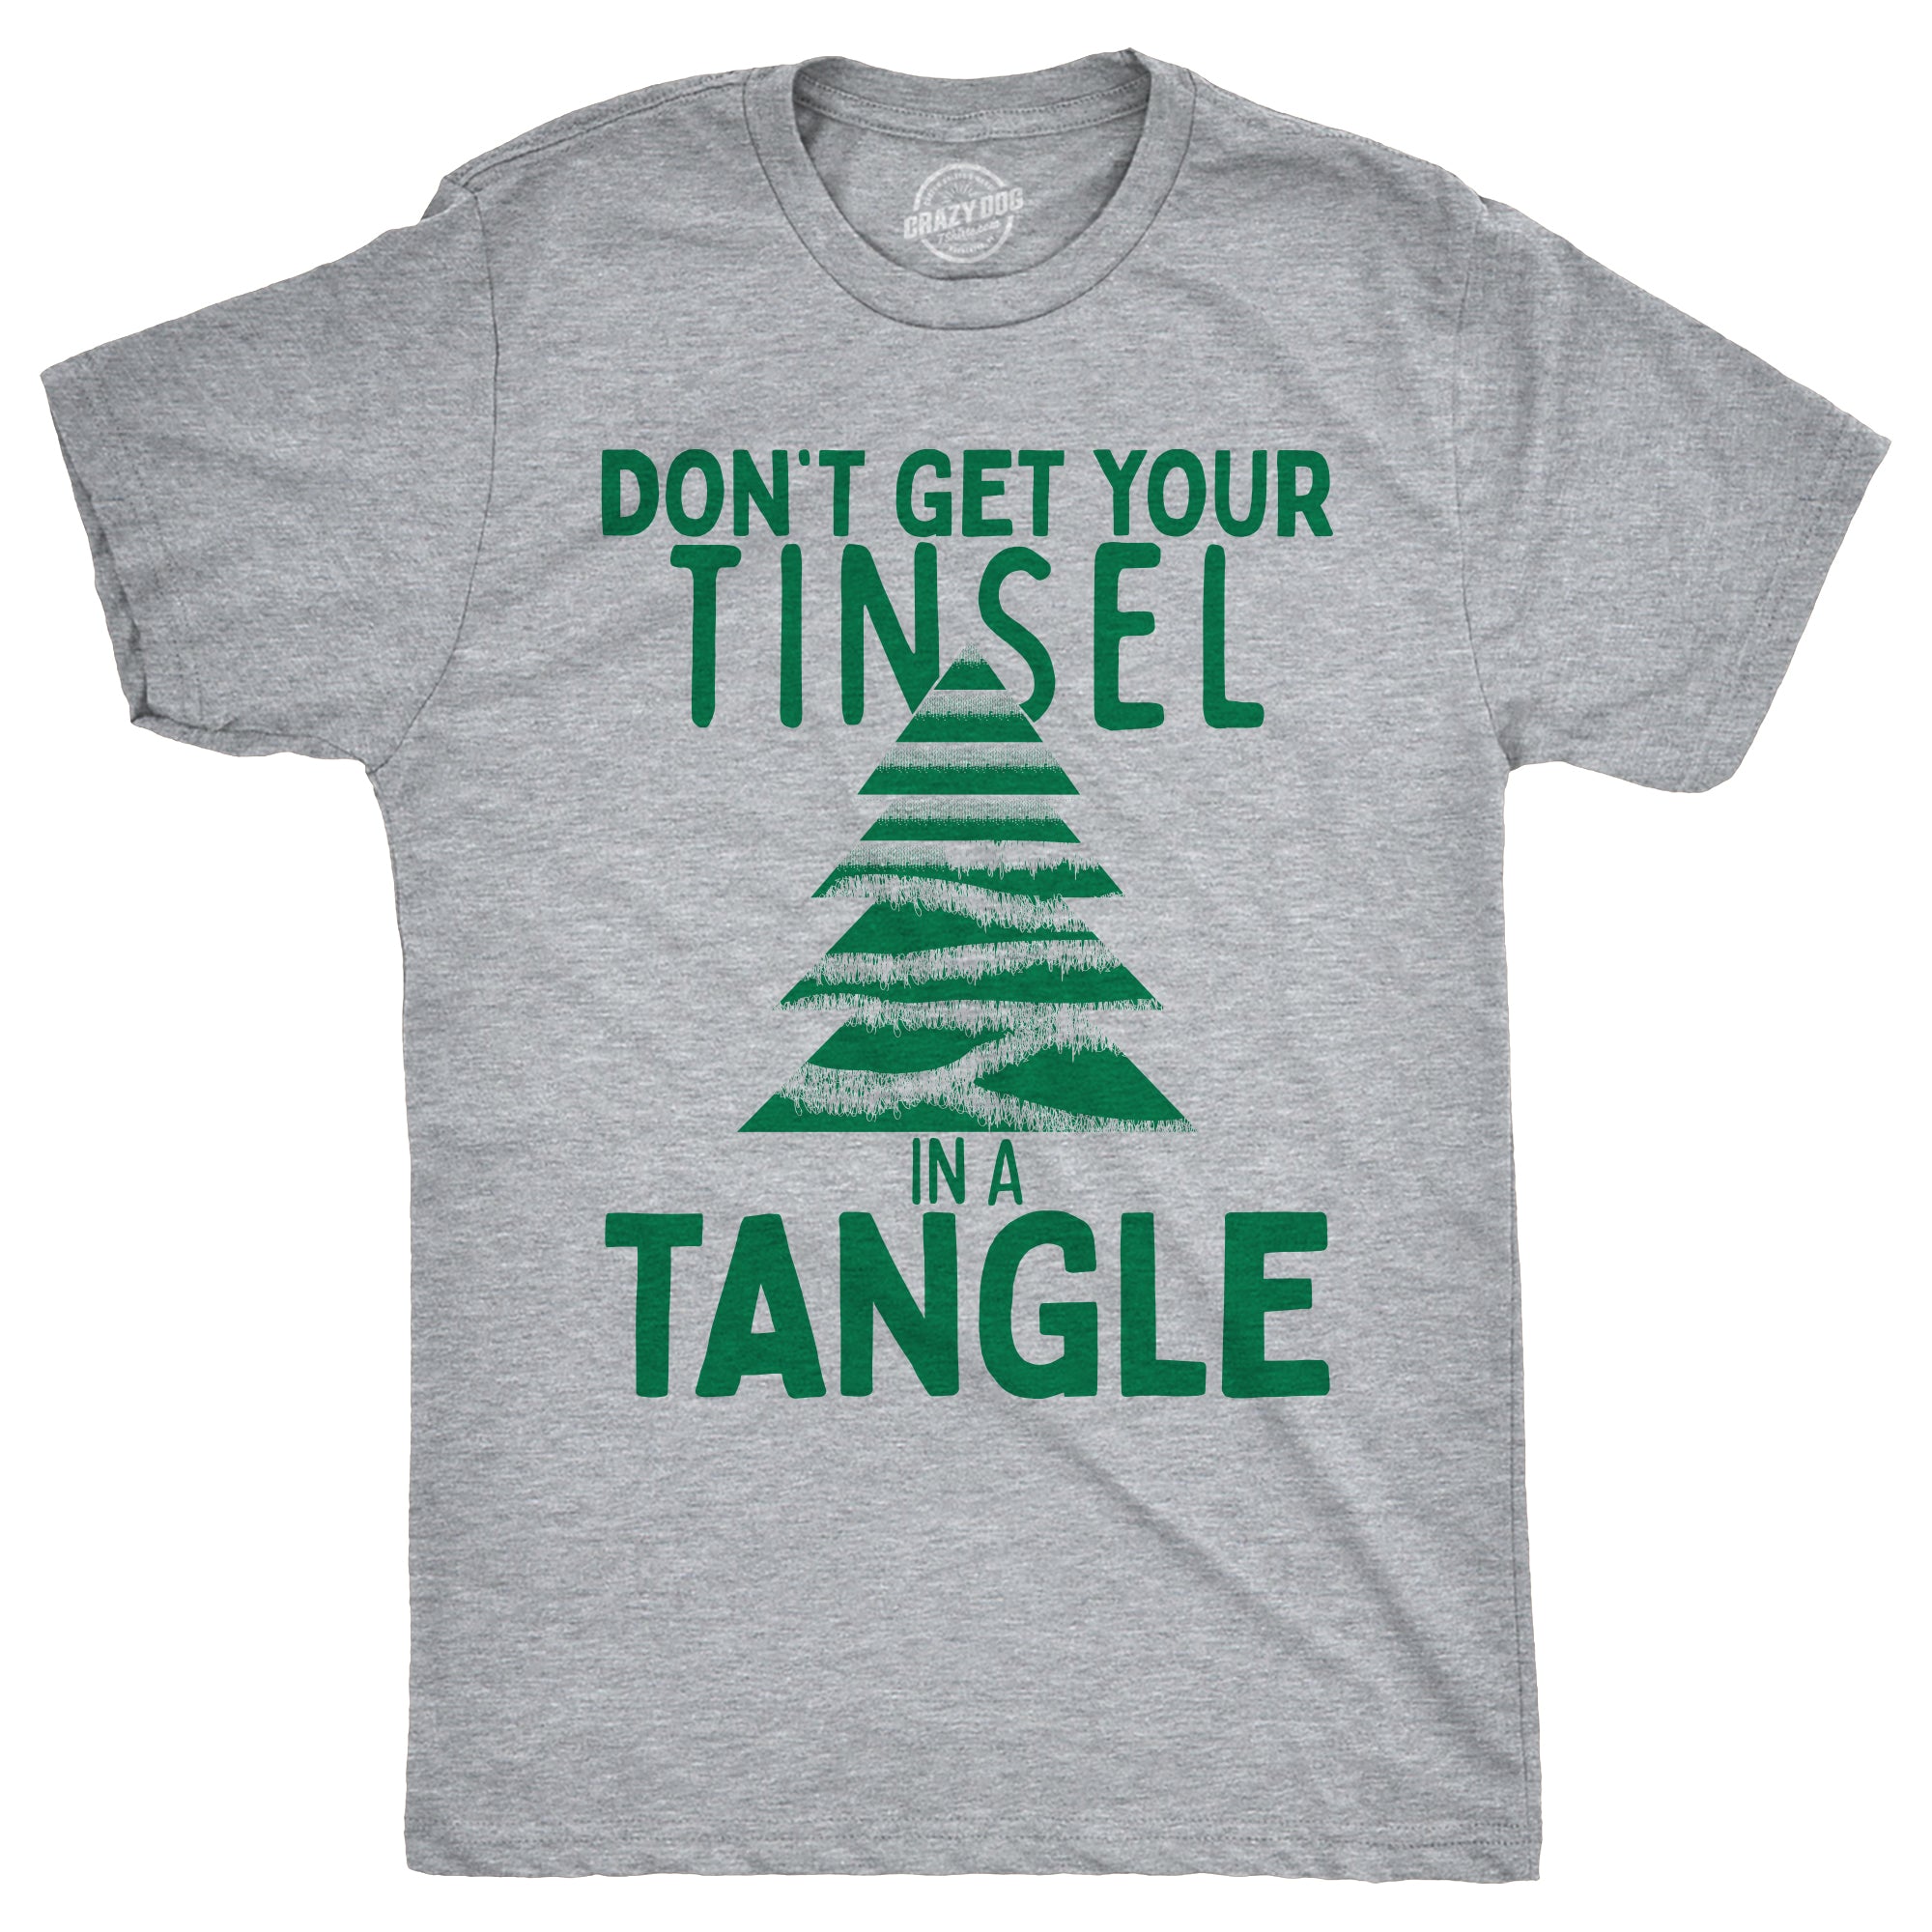 Funny Light Heather Grey - TINSEL Dont Get Your Tinsel In A Tangle Mens T Shirt Nerdy Christmas Sarcastic Tee